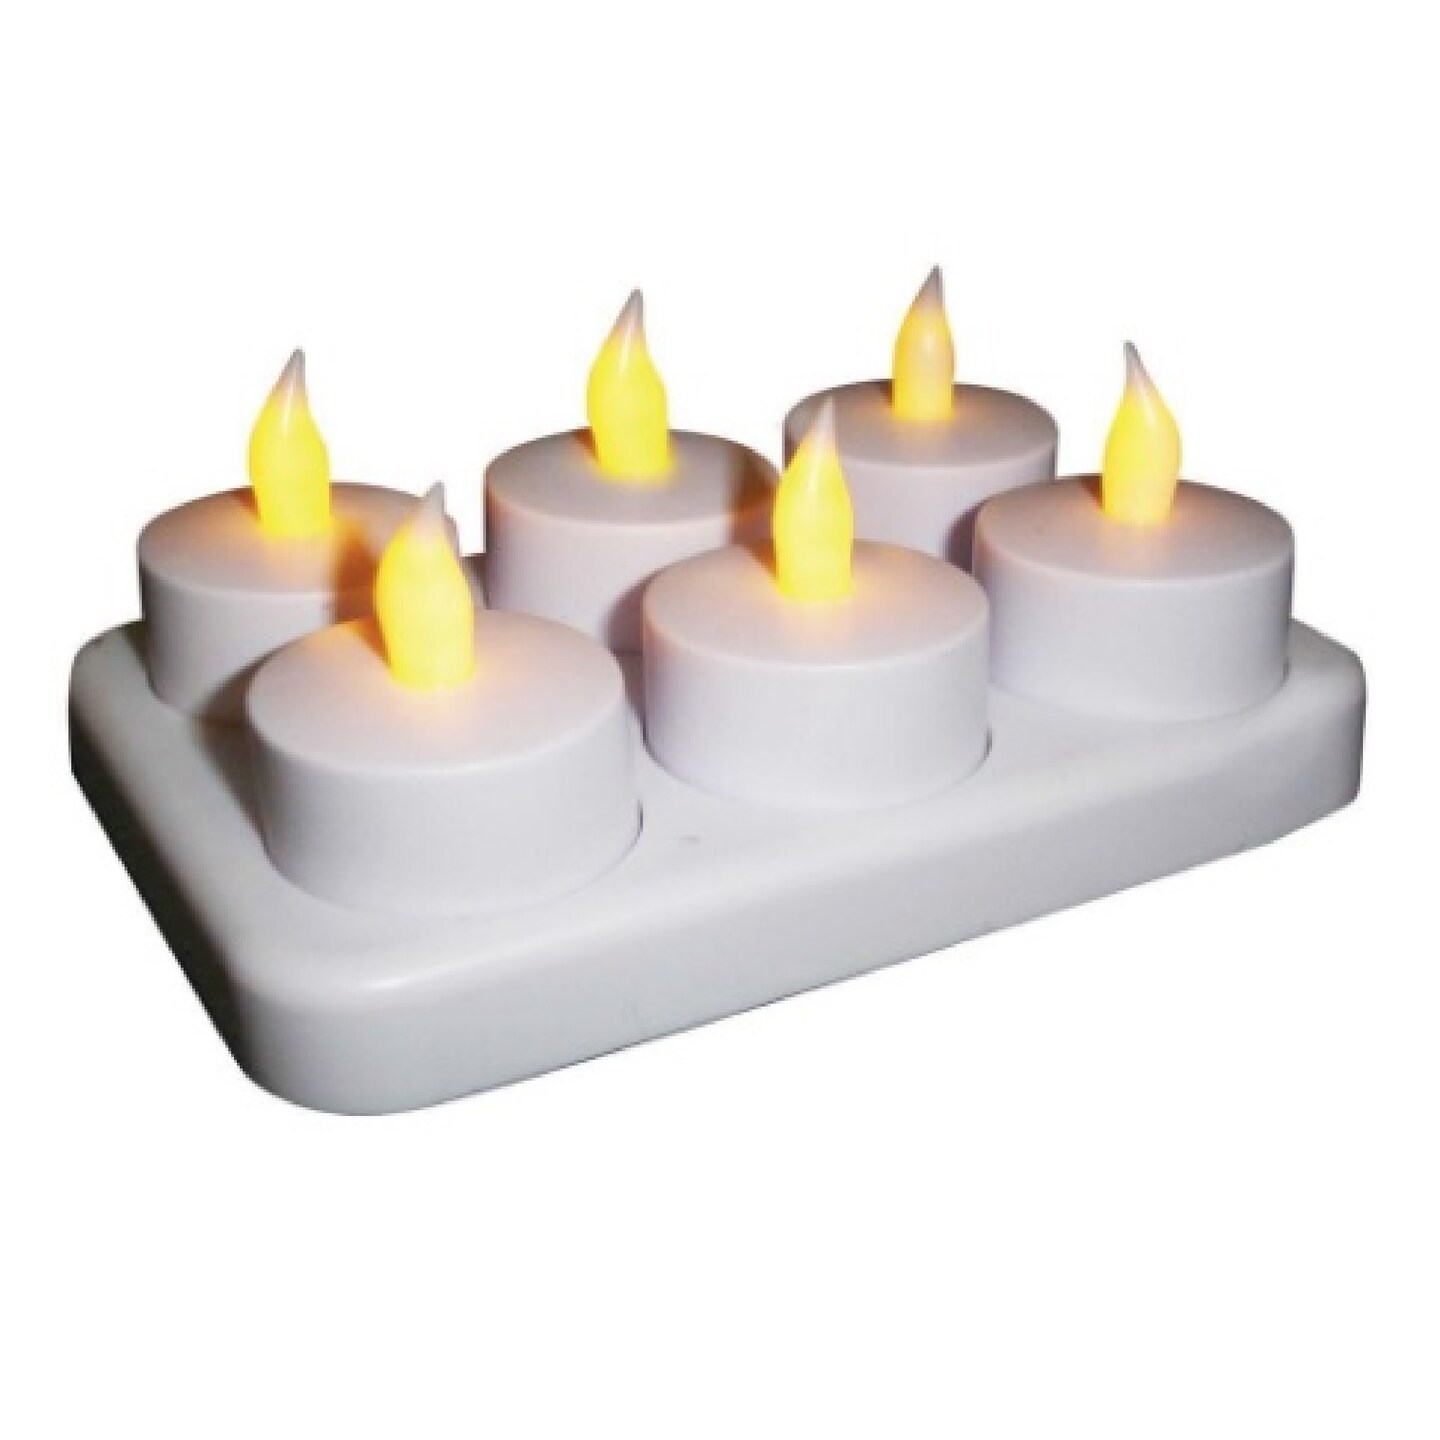 CC Christmas Decor Pack of 6 White Rechargeable Flameless Tea Light Candles with Recharging Station